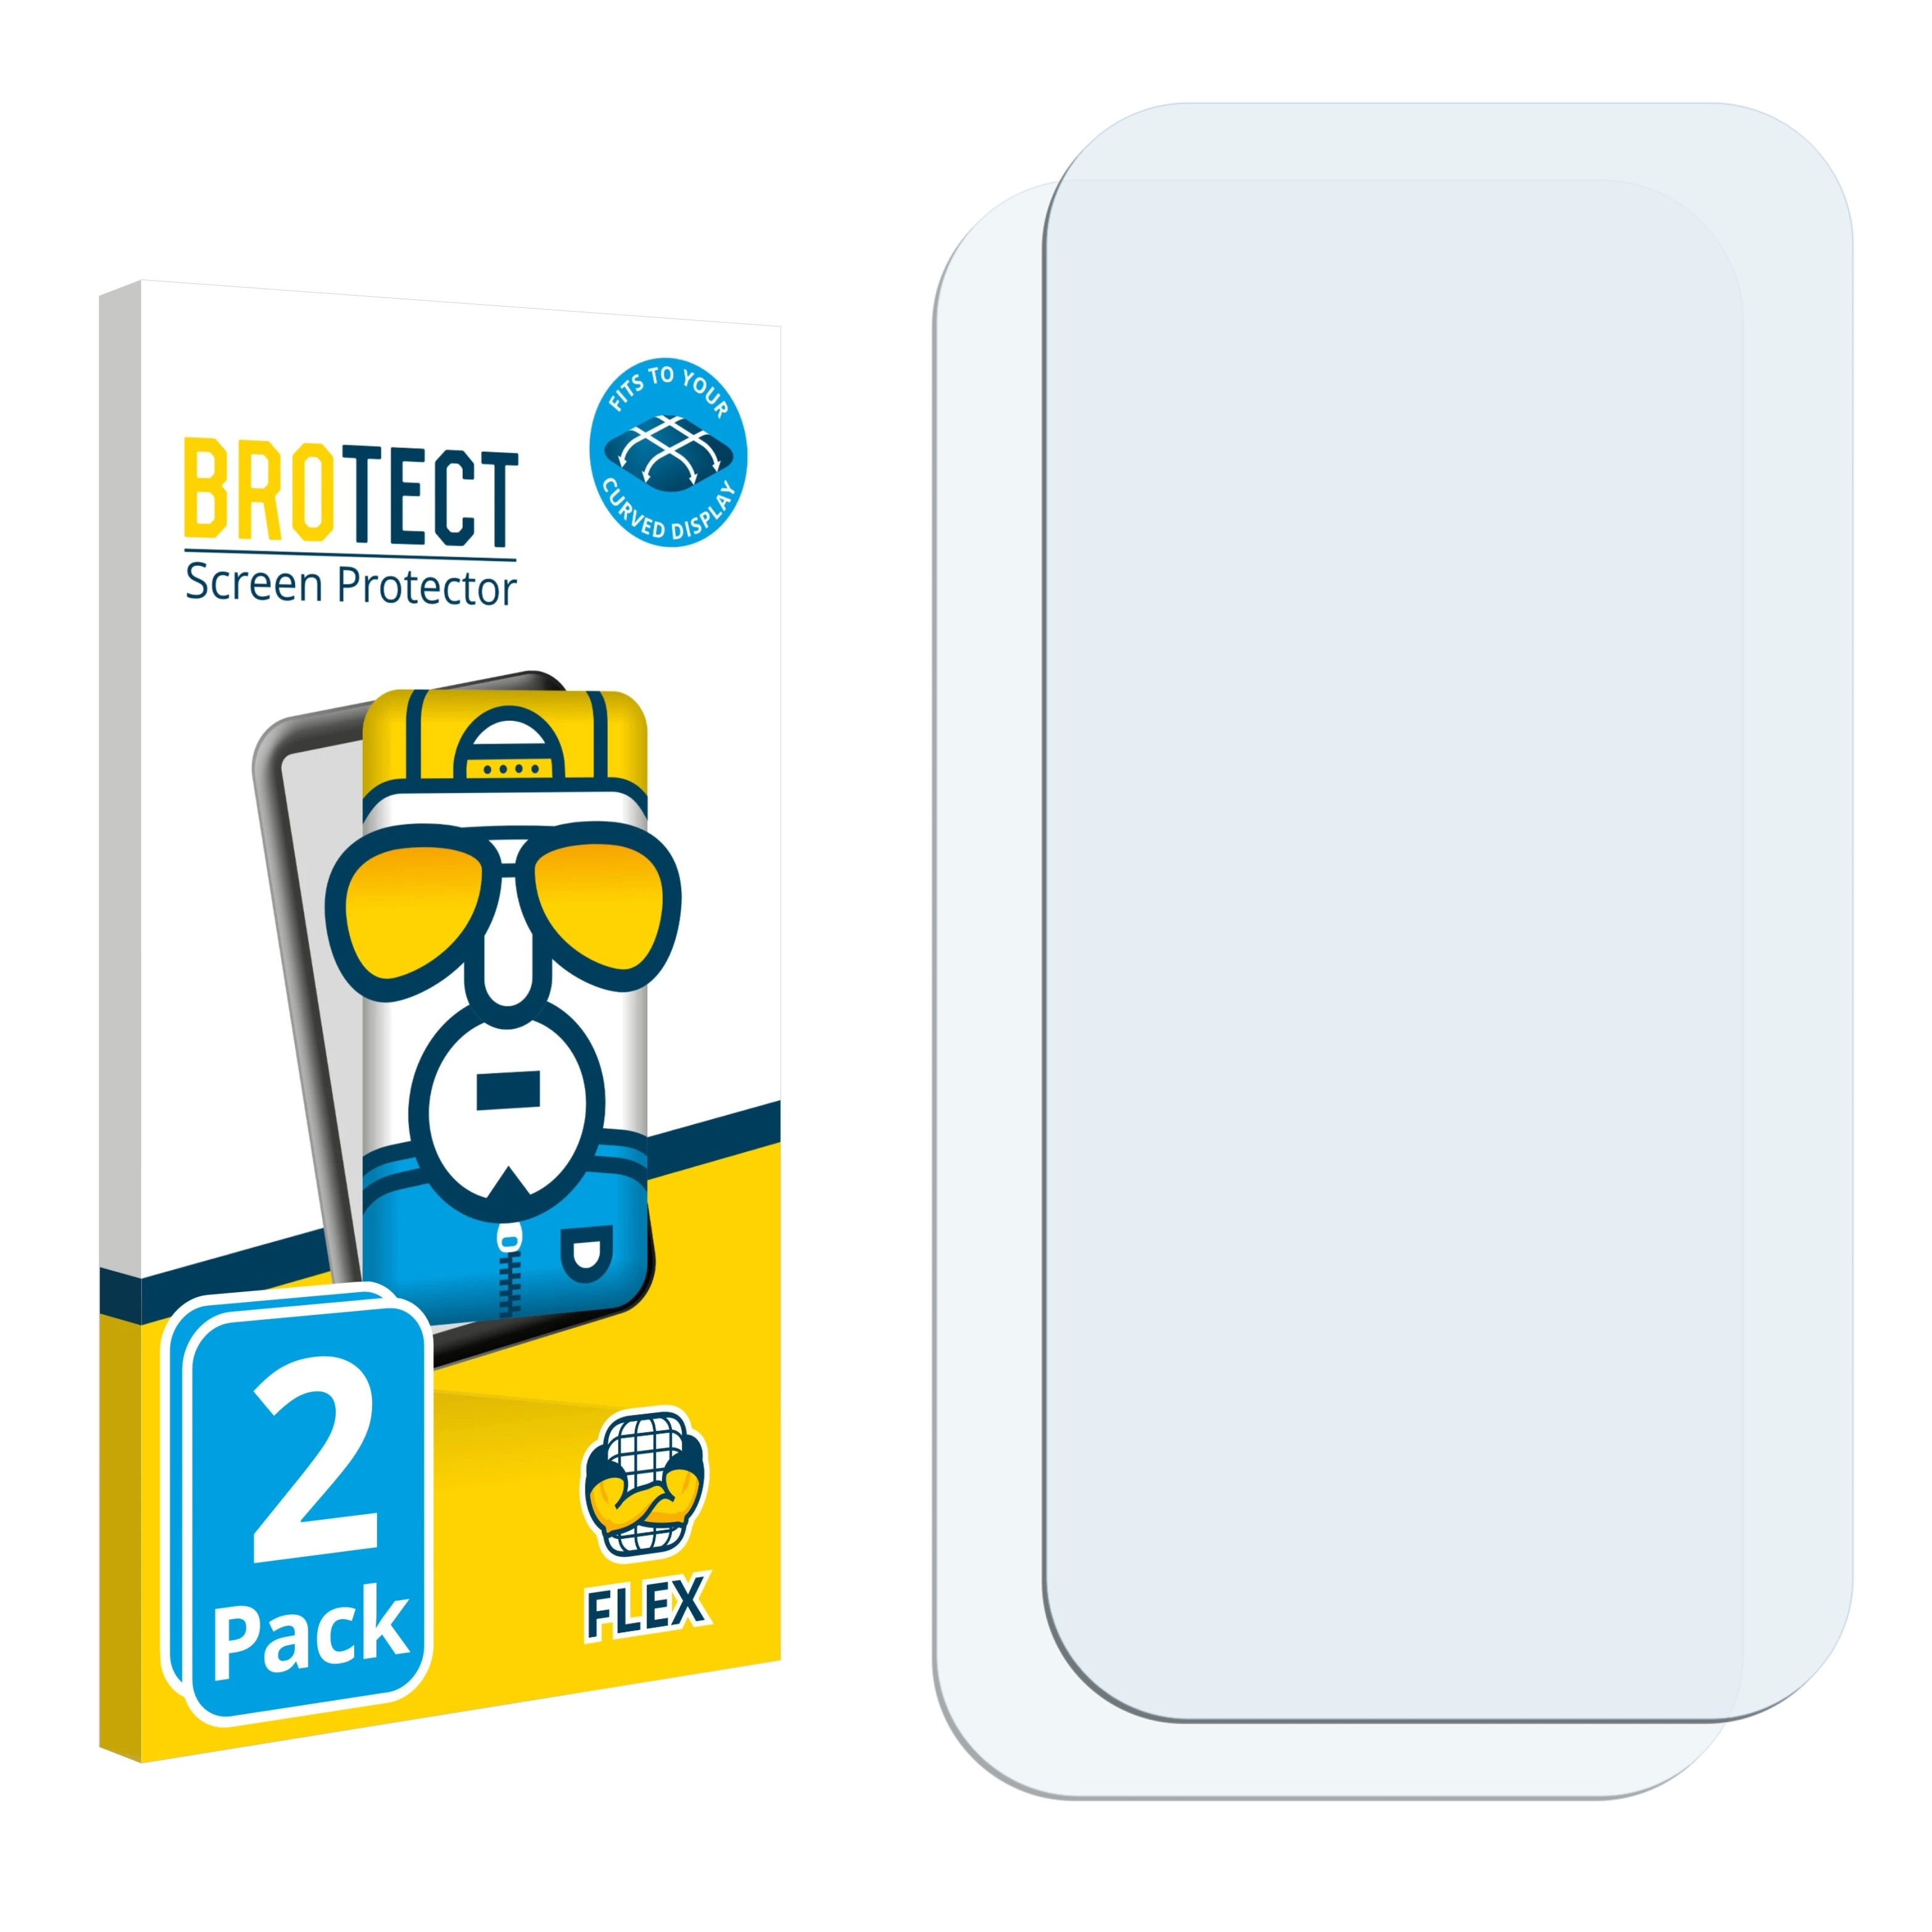 BROTECT 2x Flex Full-Cover Moveband MB20G) Schutzfolie(für Curved 3D TCL